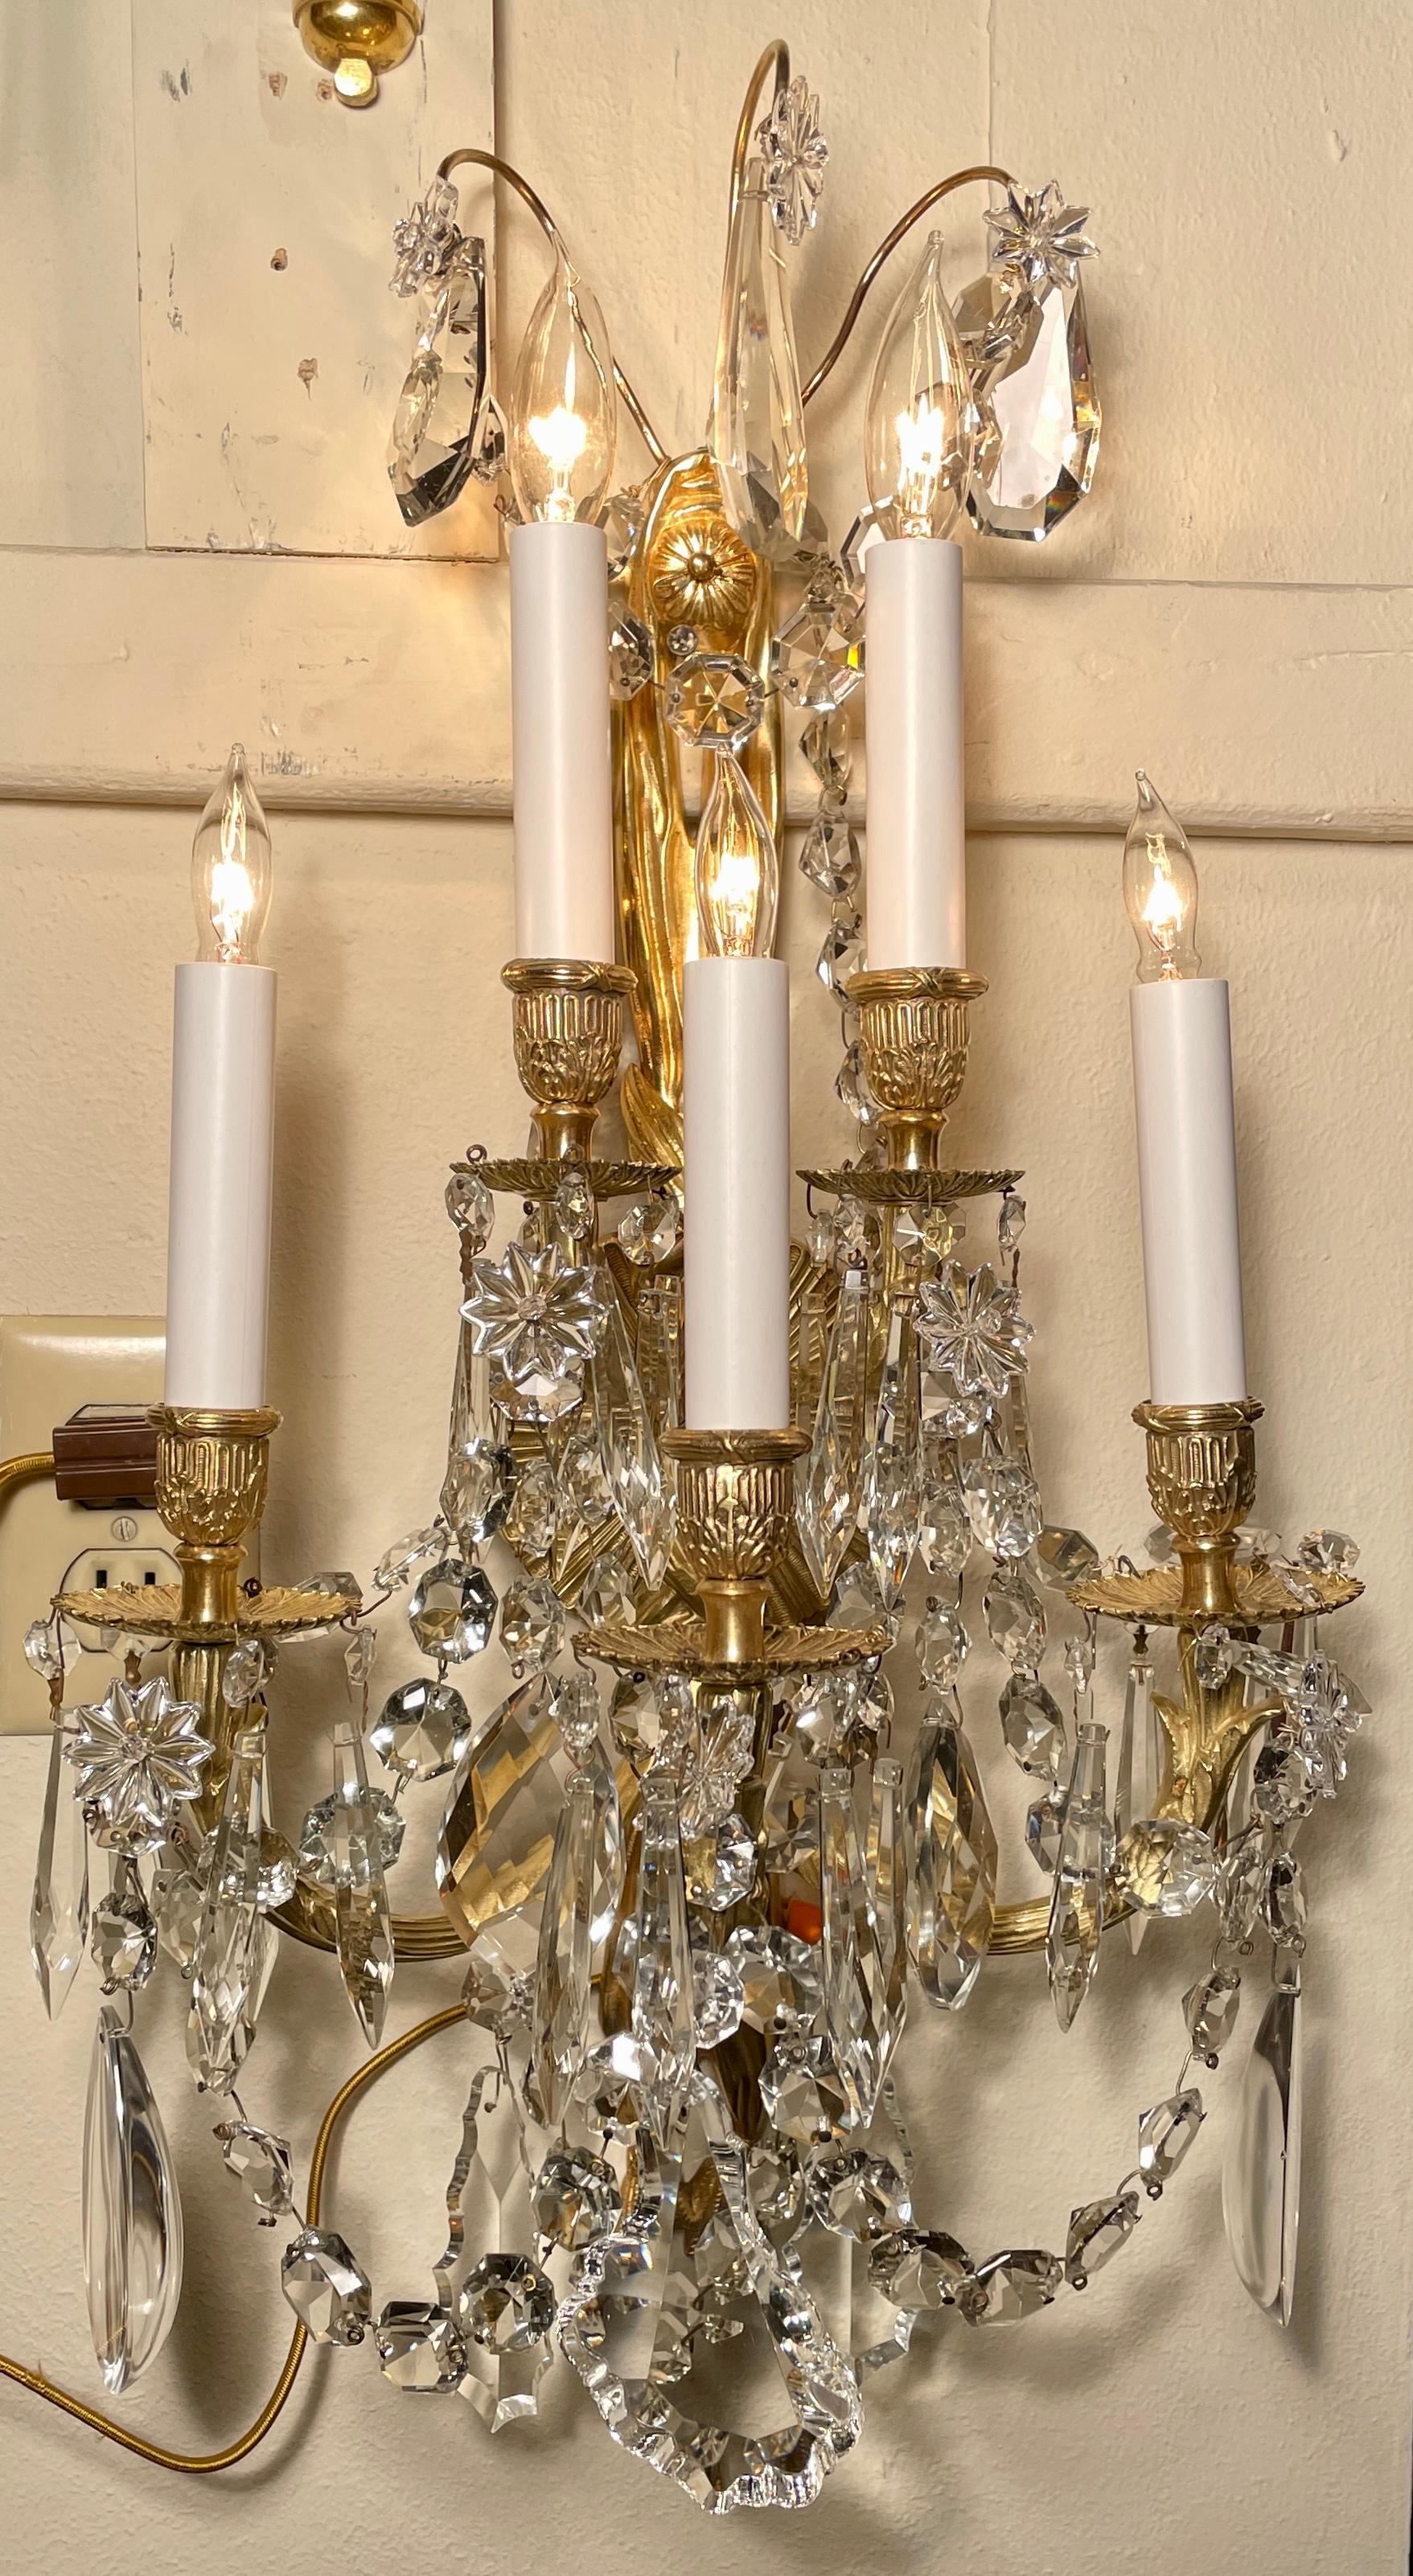 Pair antique French bronze d' ore and crystal wall sconces, circa 1890s.